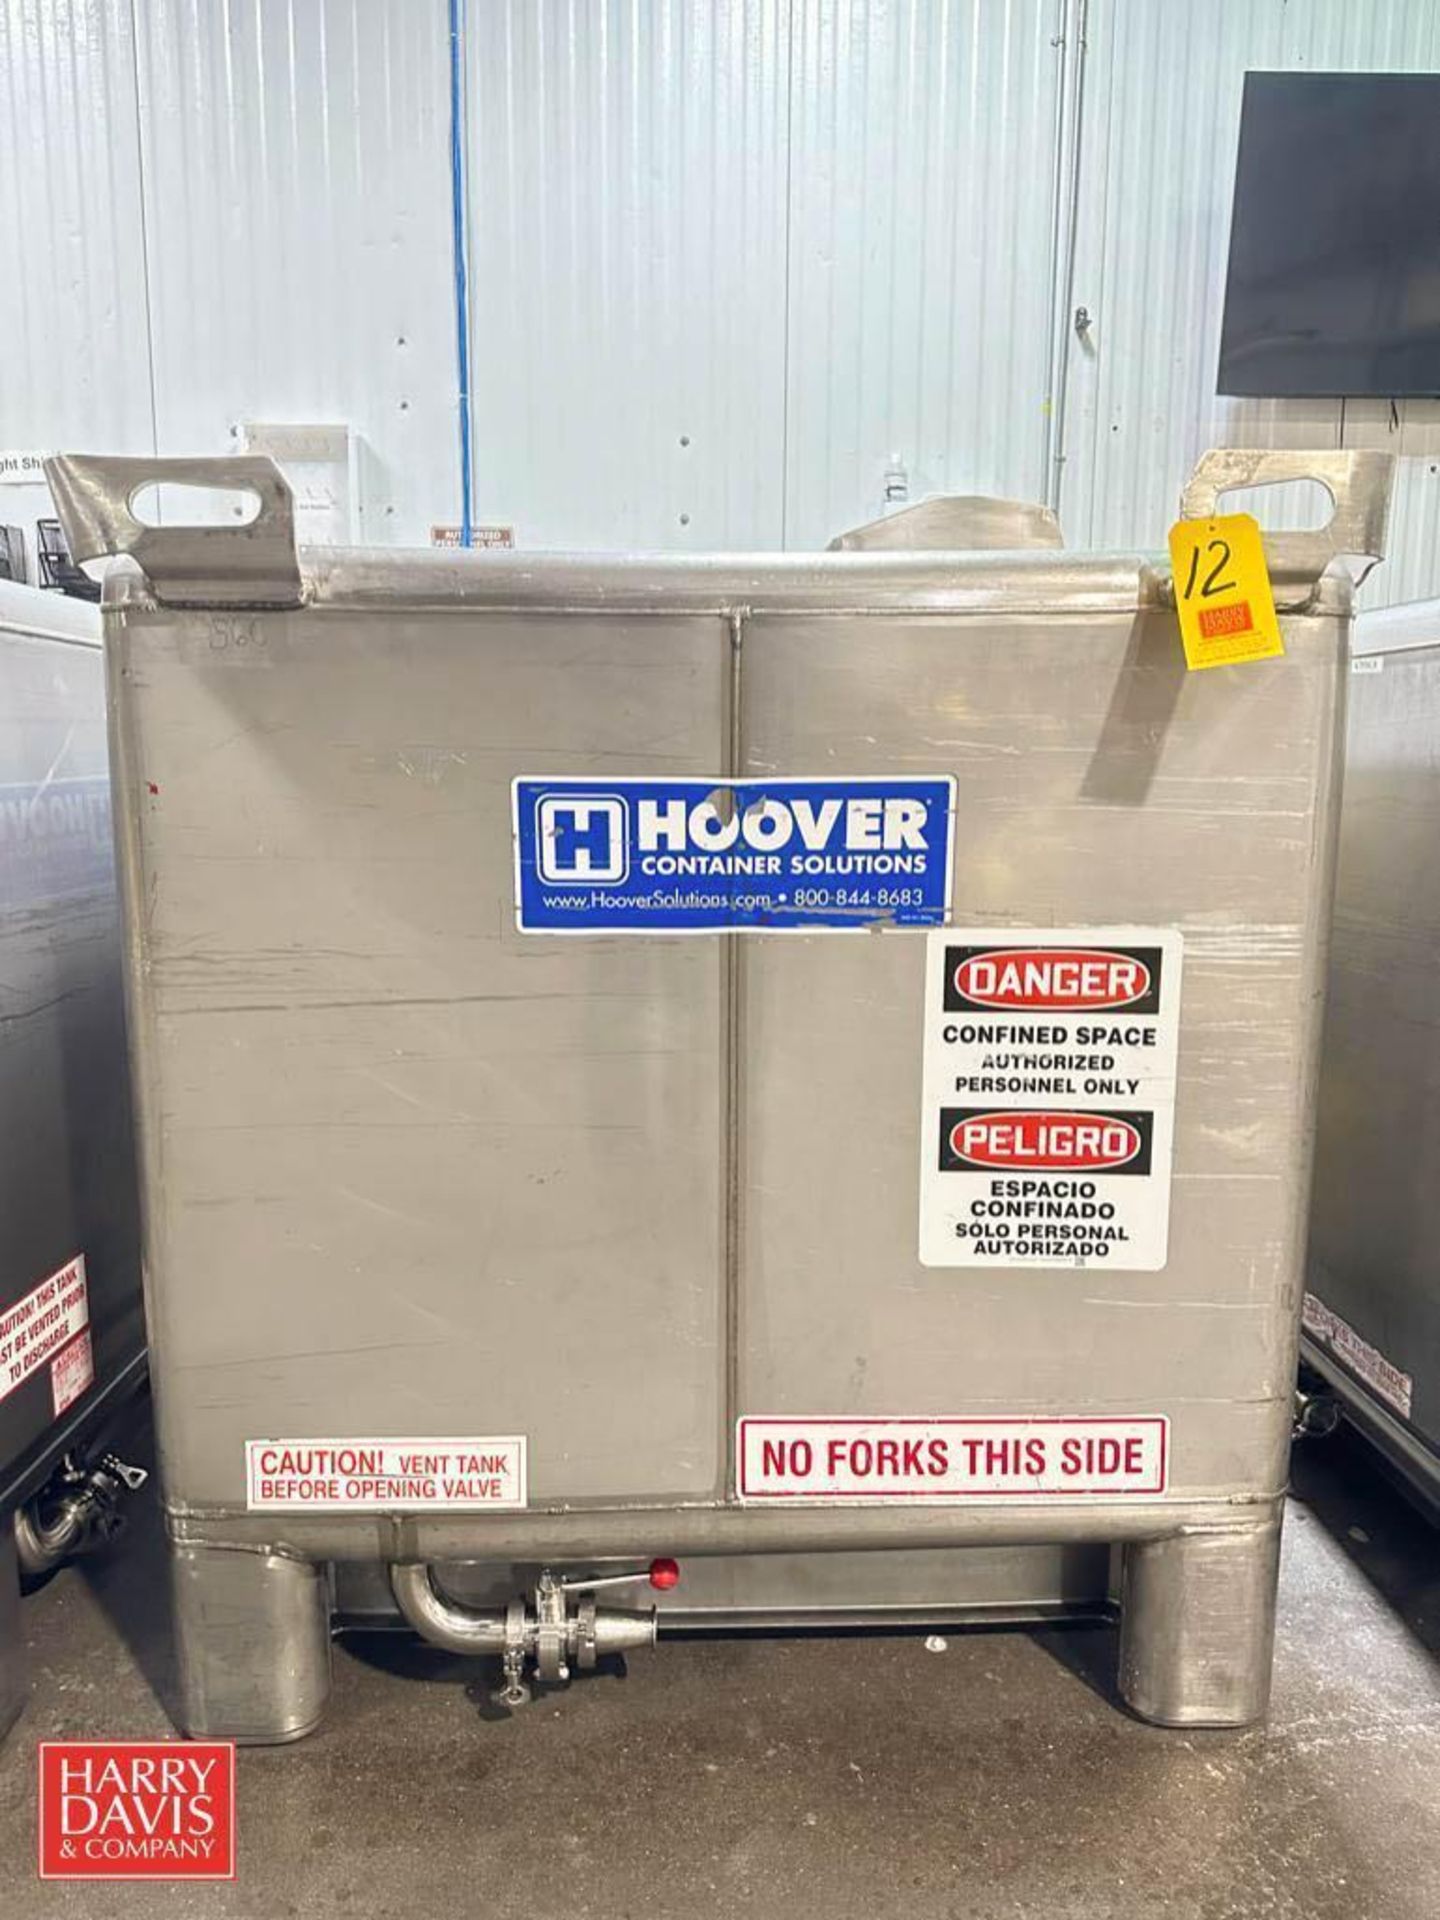 2014 Hoover 350 Gallon S/S IBC Tote, Model: 110477, S/N: 356556 with S/S Butterfly Valve